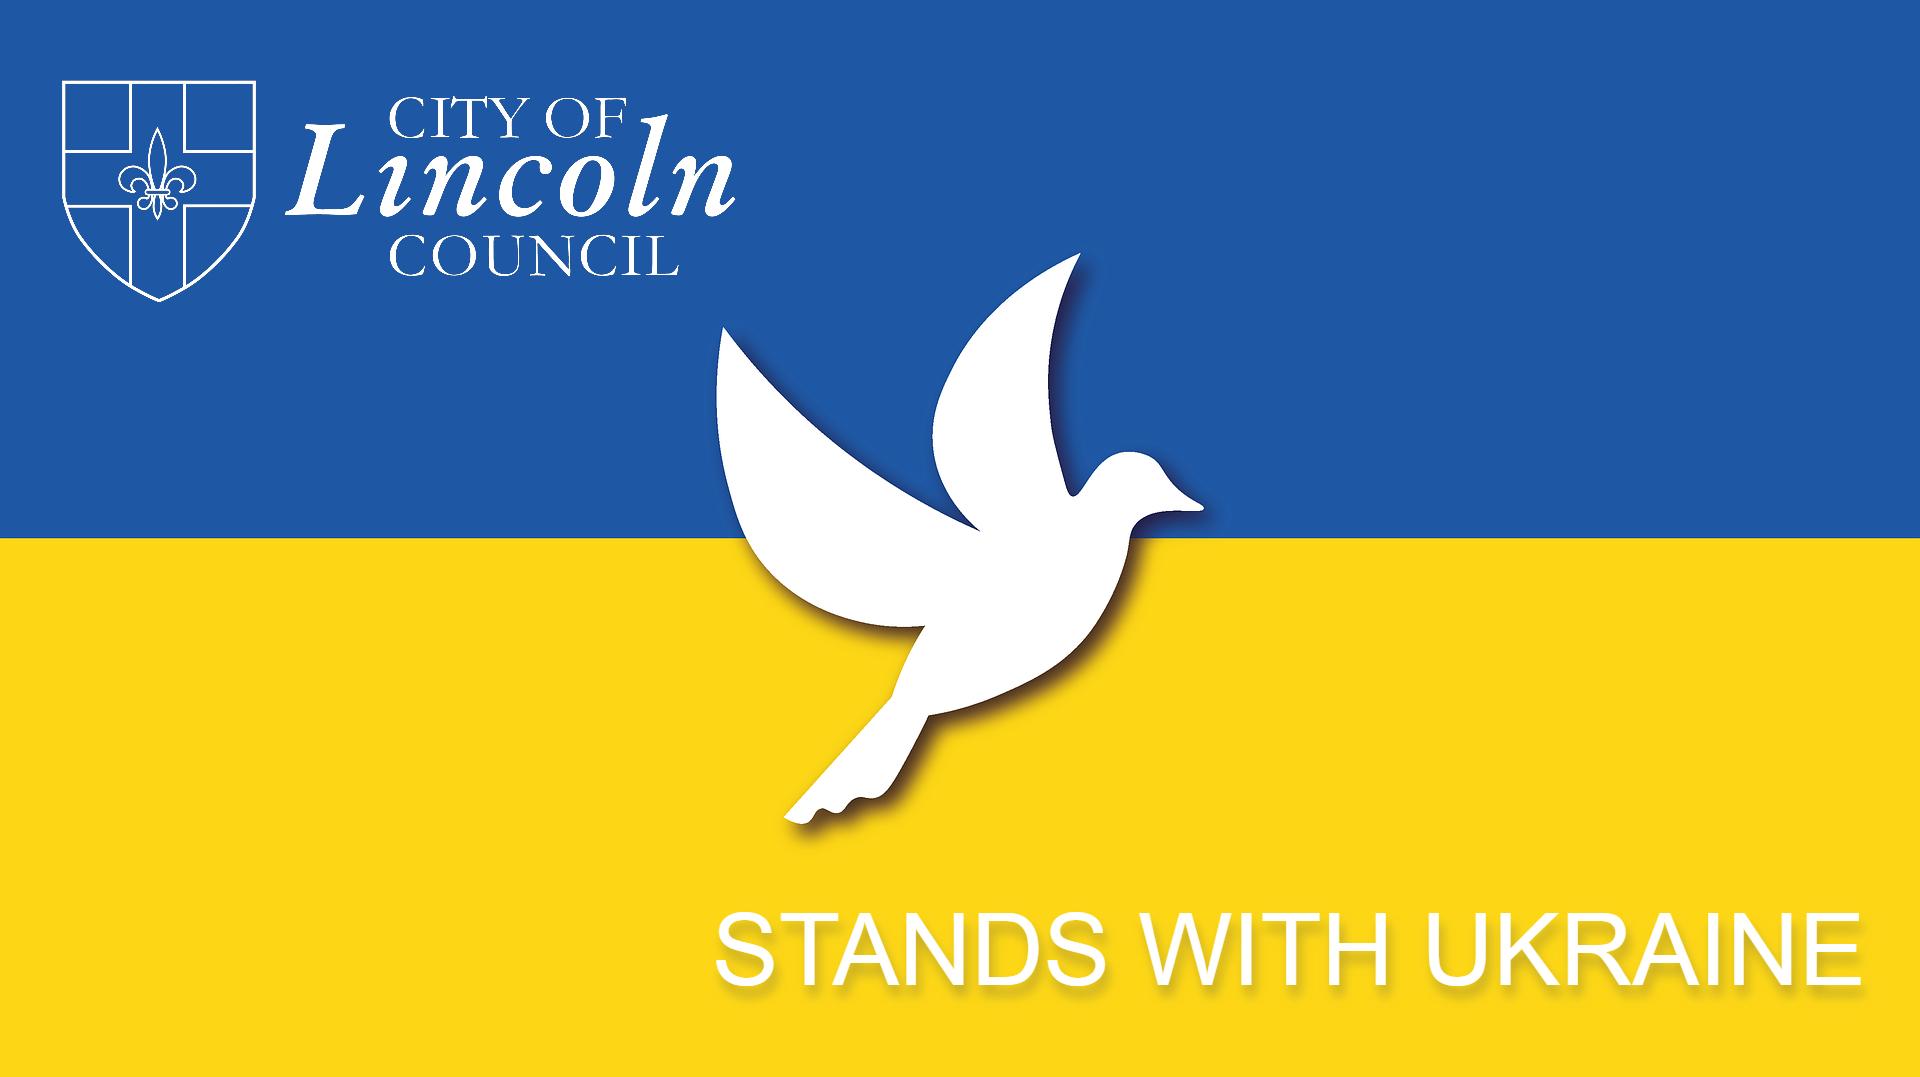 A symbol of support and peace for Ukraine